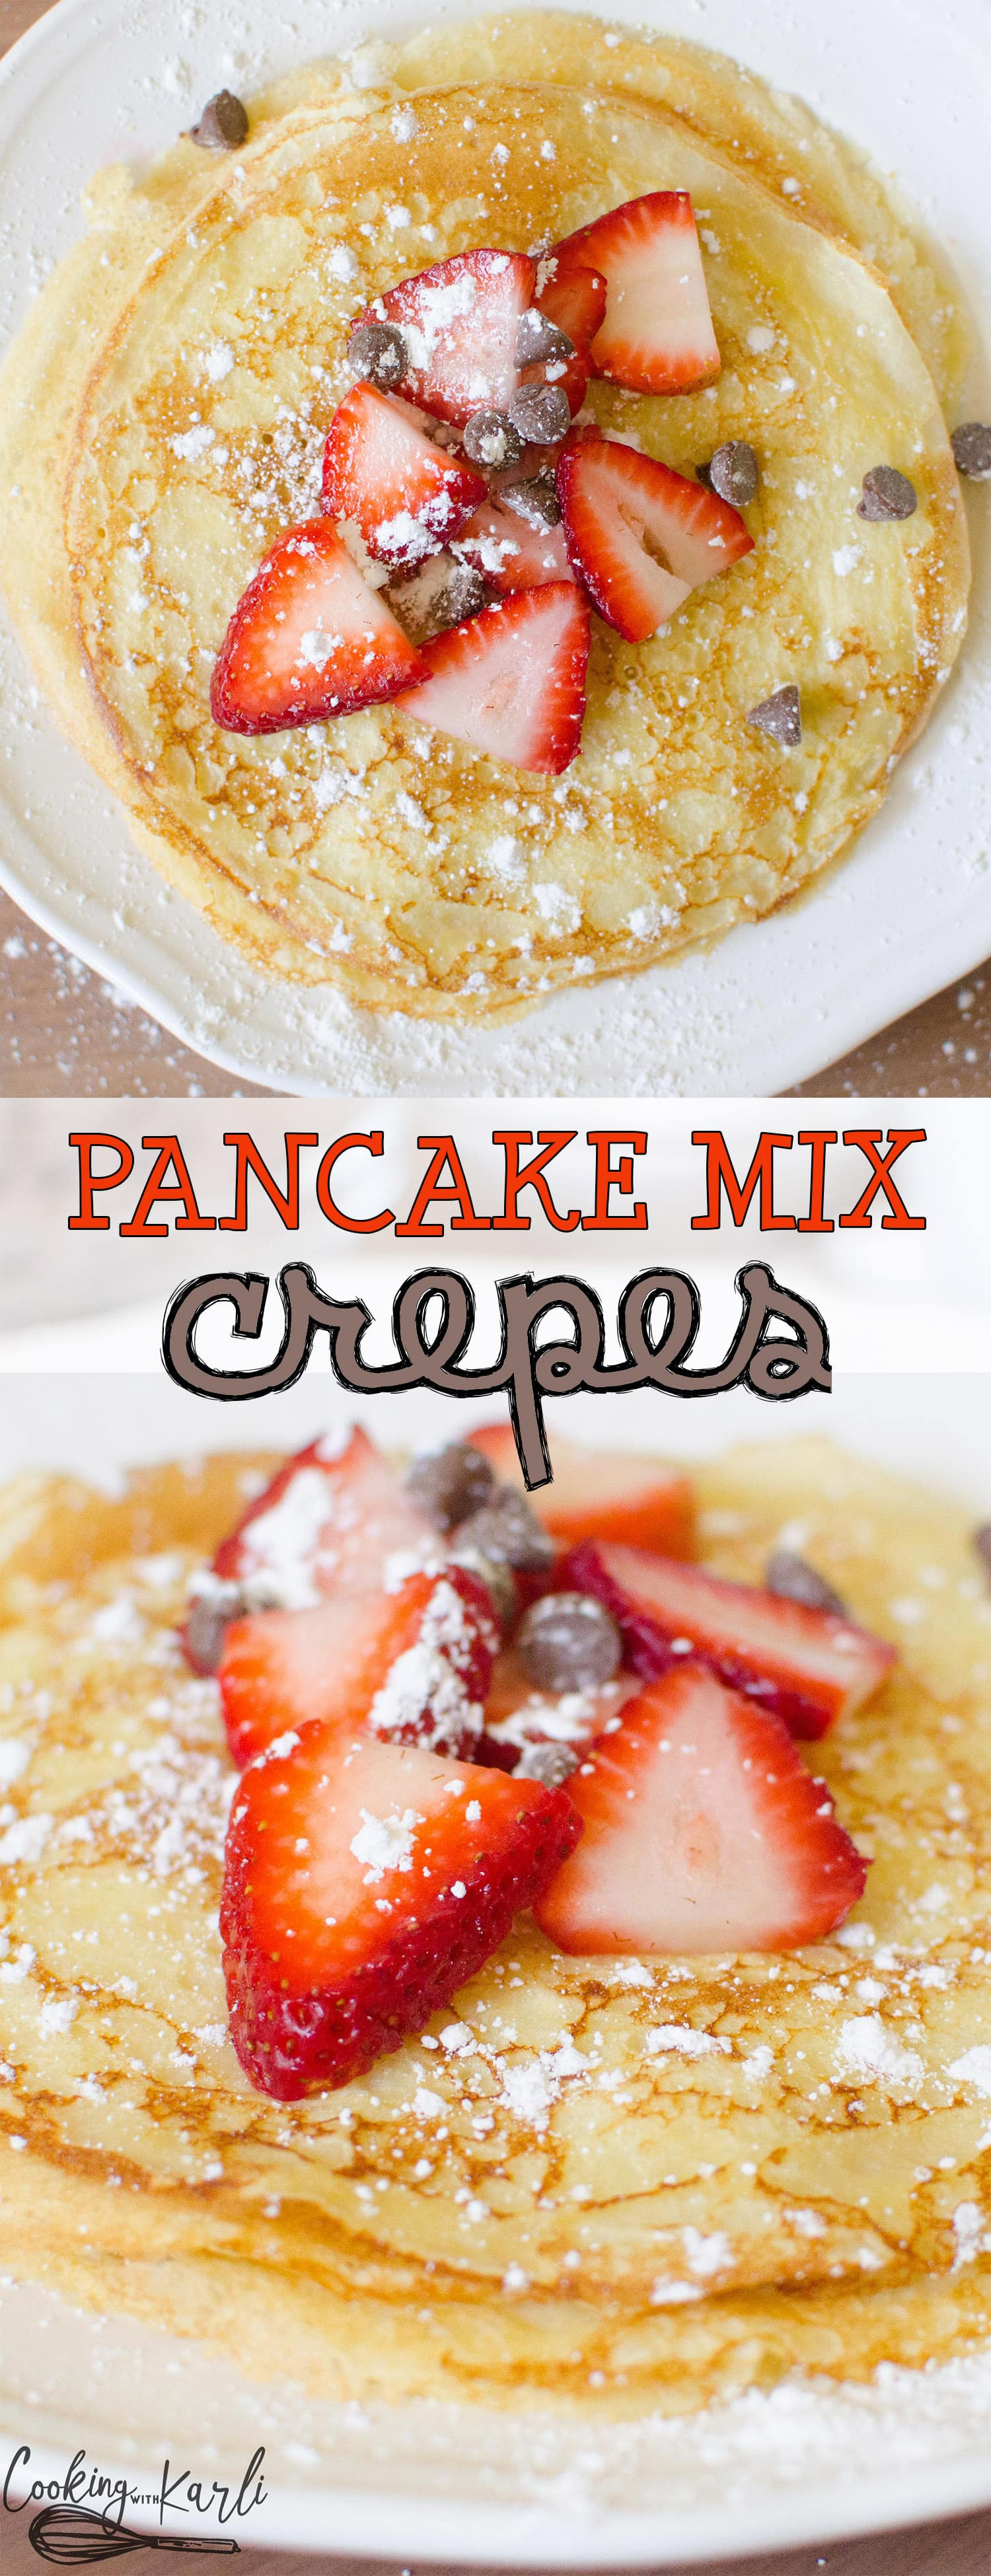 How To Make Crepes With Pancake Mix
 Easy Pancake Mix Crepes Cooking With Karli